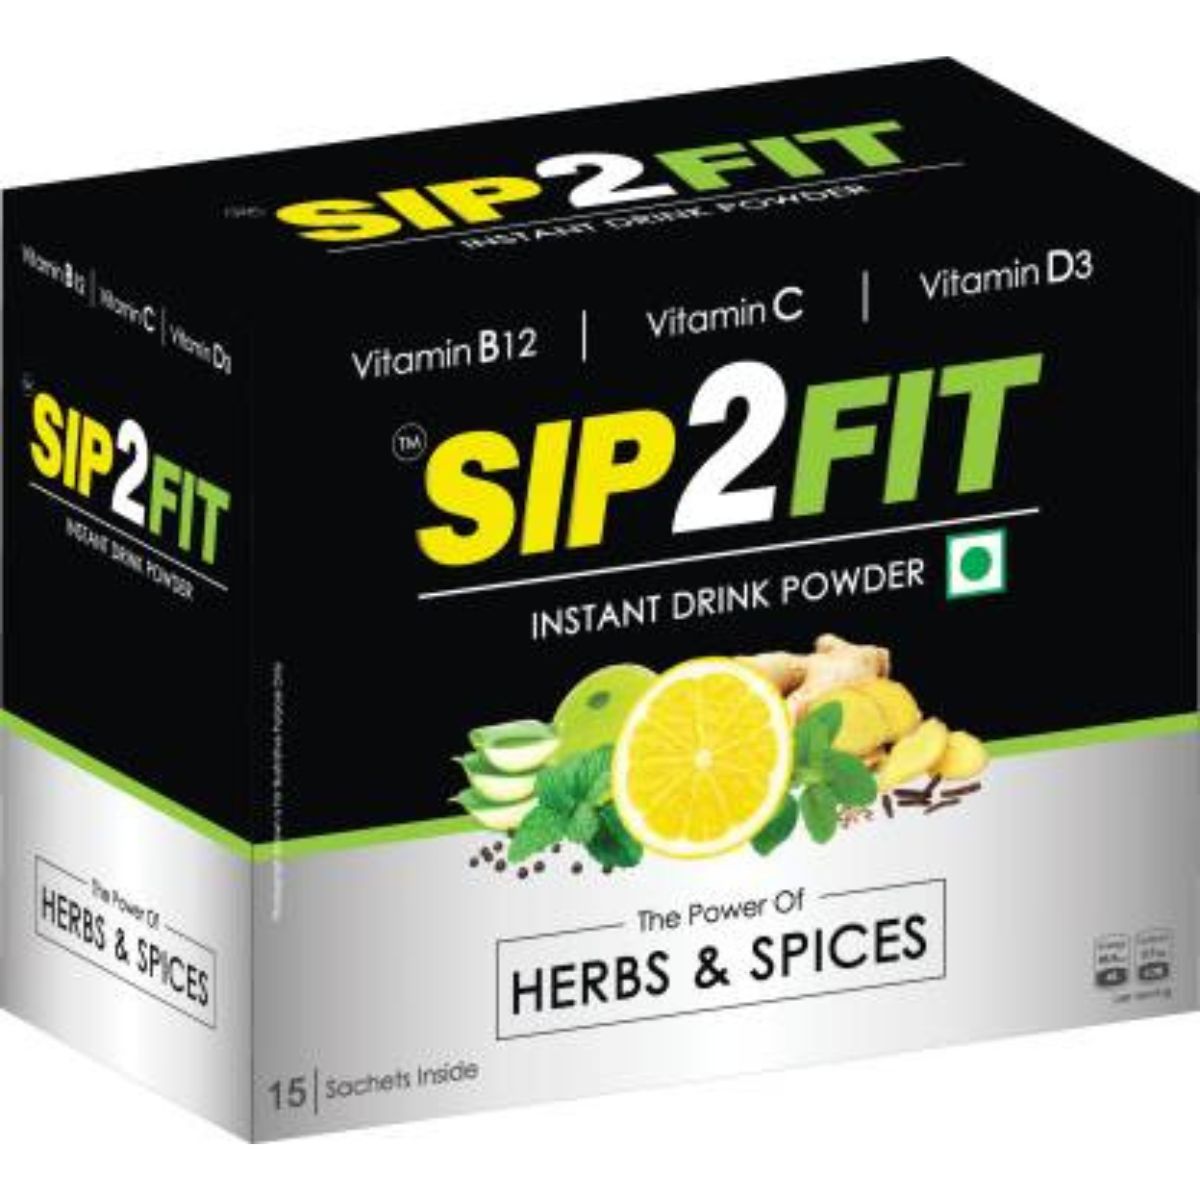 Sip 2 Fit - Instant Drink Powder - 15 Sachets